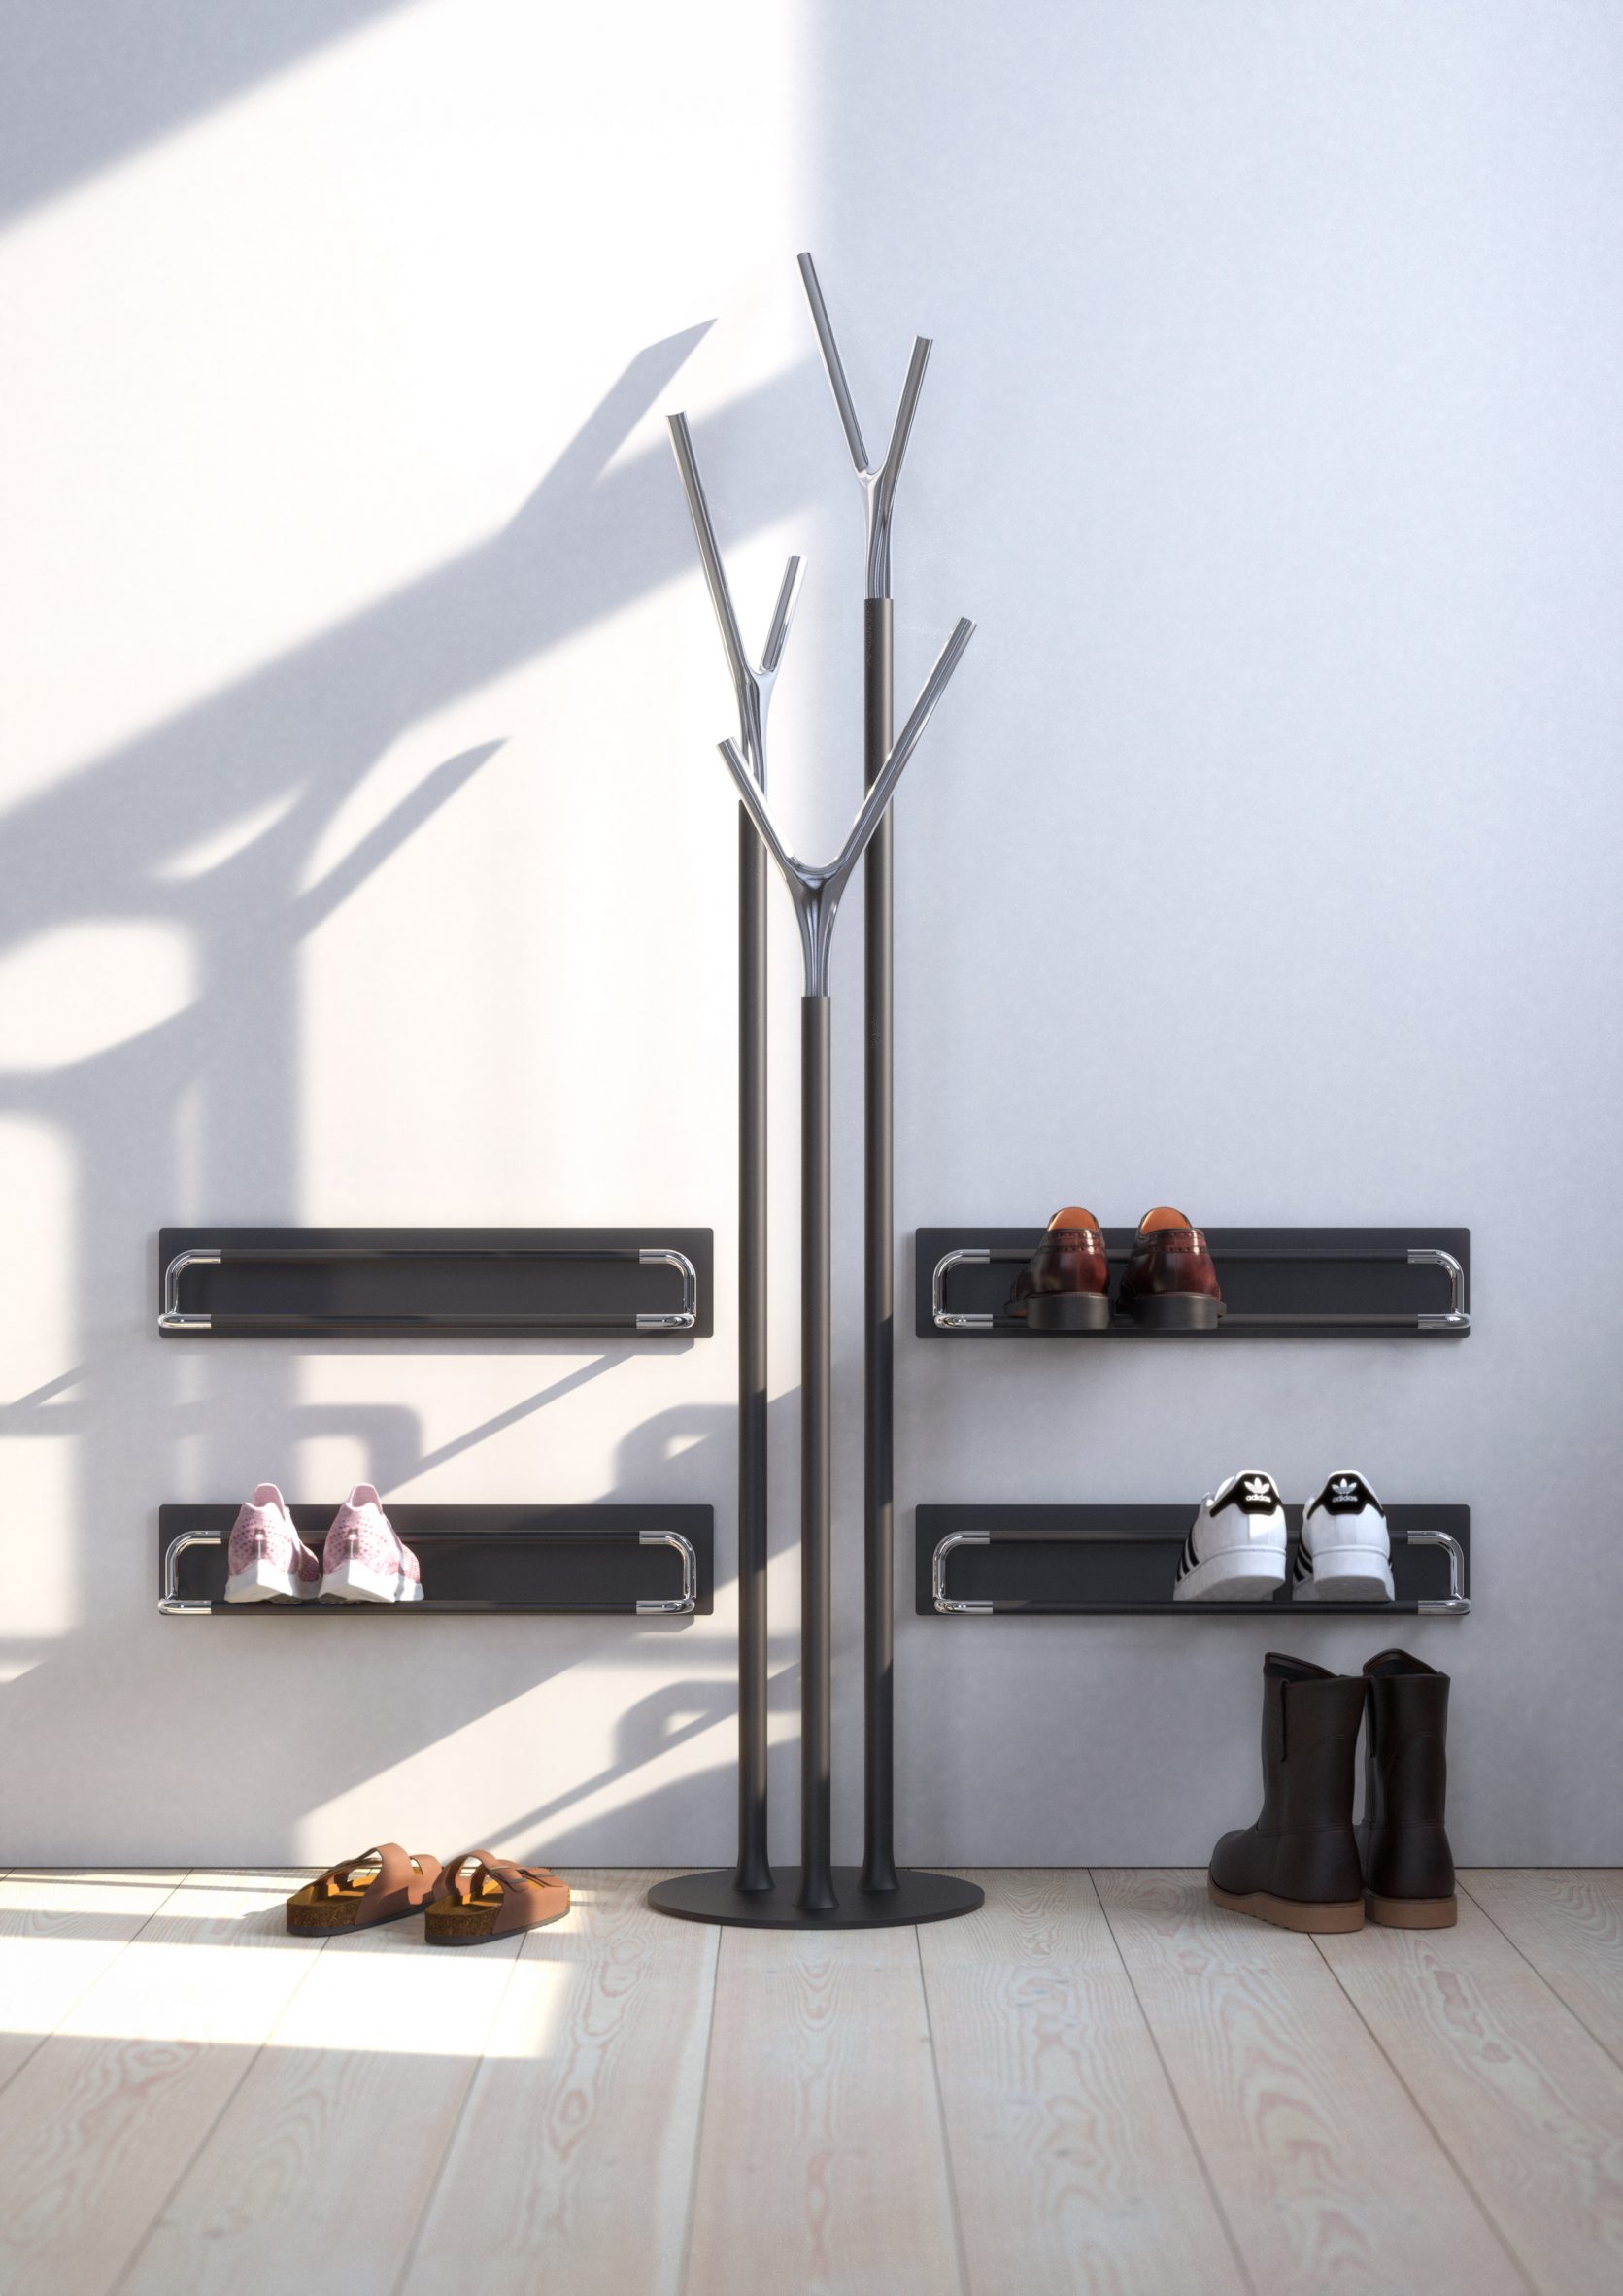 Photo of a black-coloured Wishbone stand by Frost in a minimal hallway with shoes on racks alongside